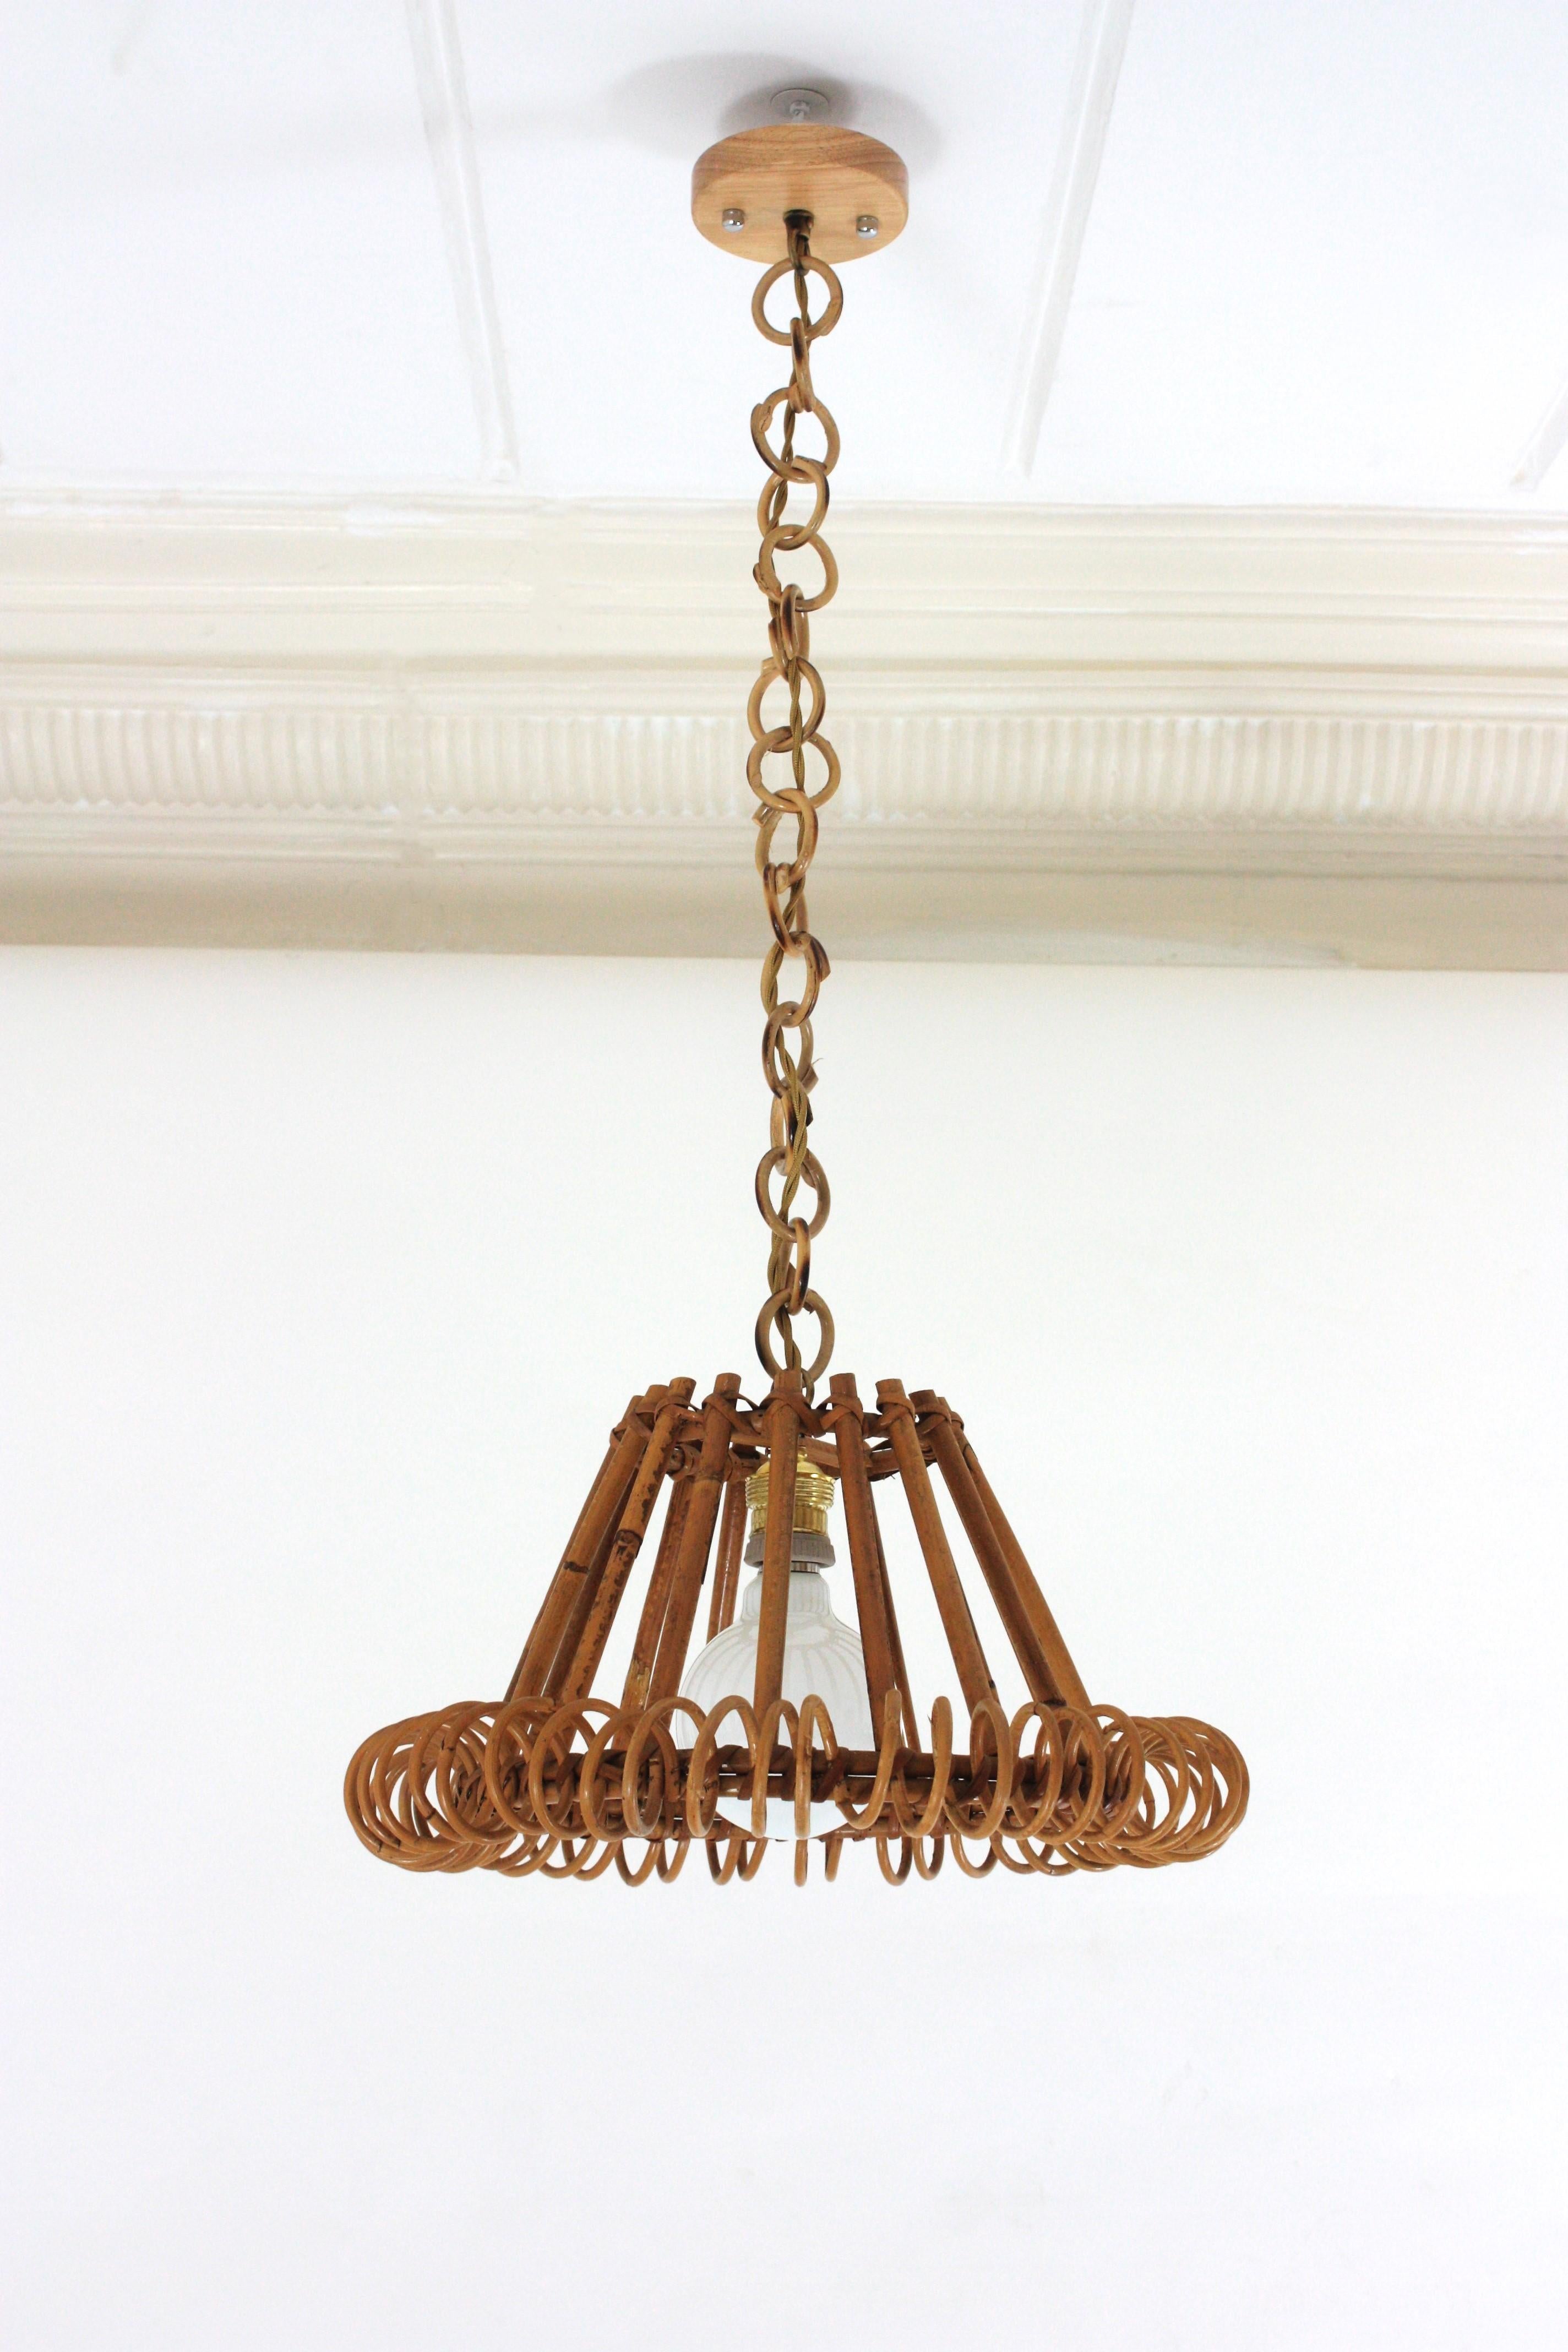 Hand-Crafted Rattan Pendant Hanging Light with Spiral Detail, Franco Albini Style For Sale